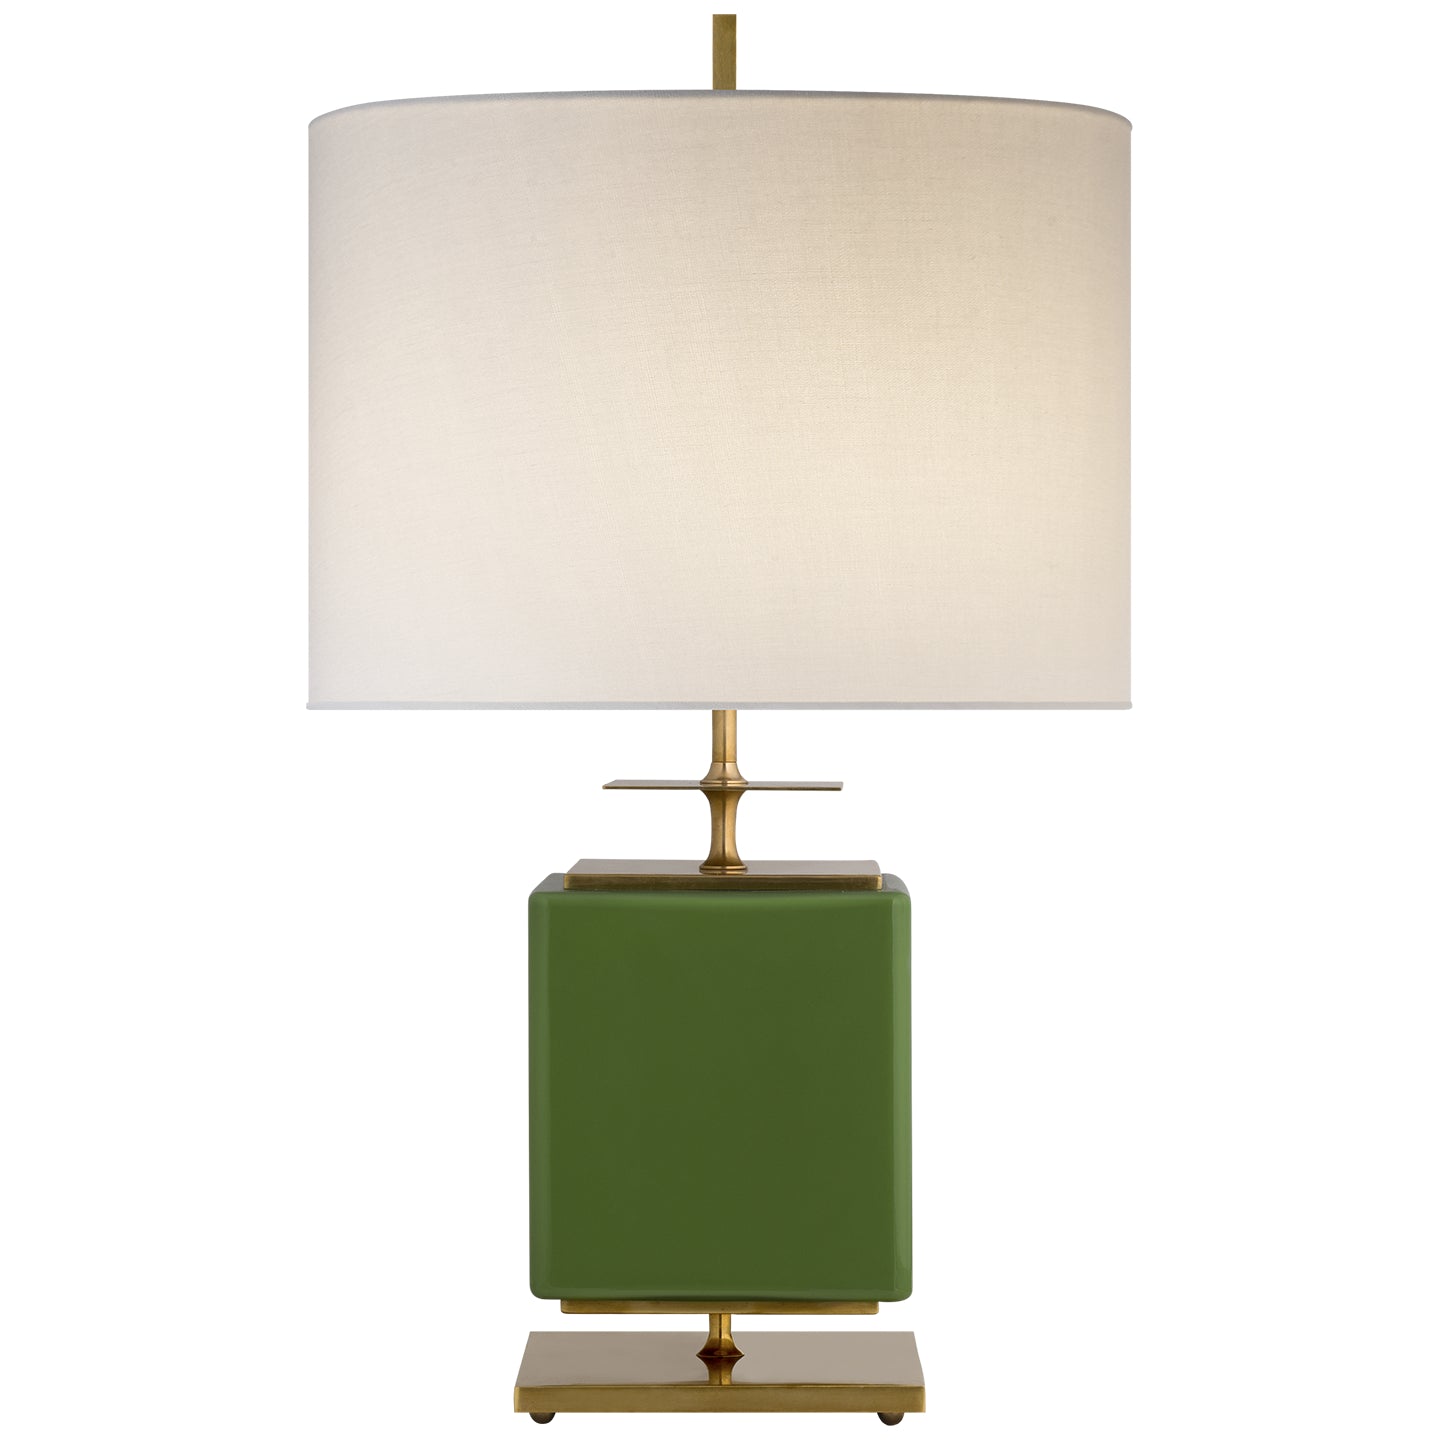 Load image into Gallery viewer, Visual Comfort Signature - KS 3043GRN-L - One Light Table Lamp - Beekman - Green
